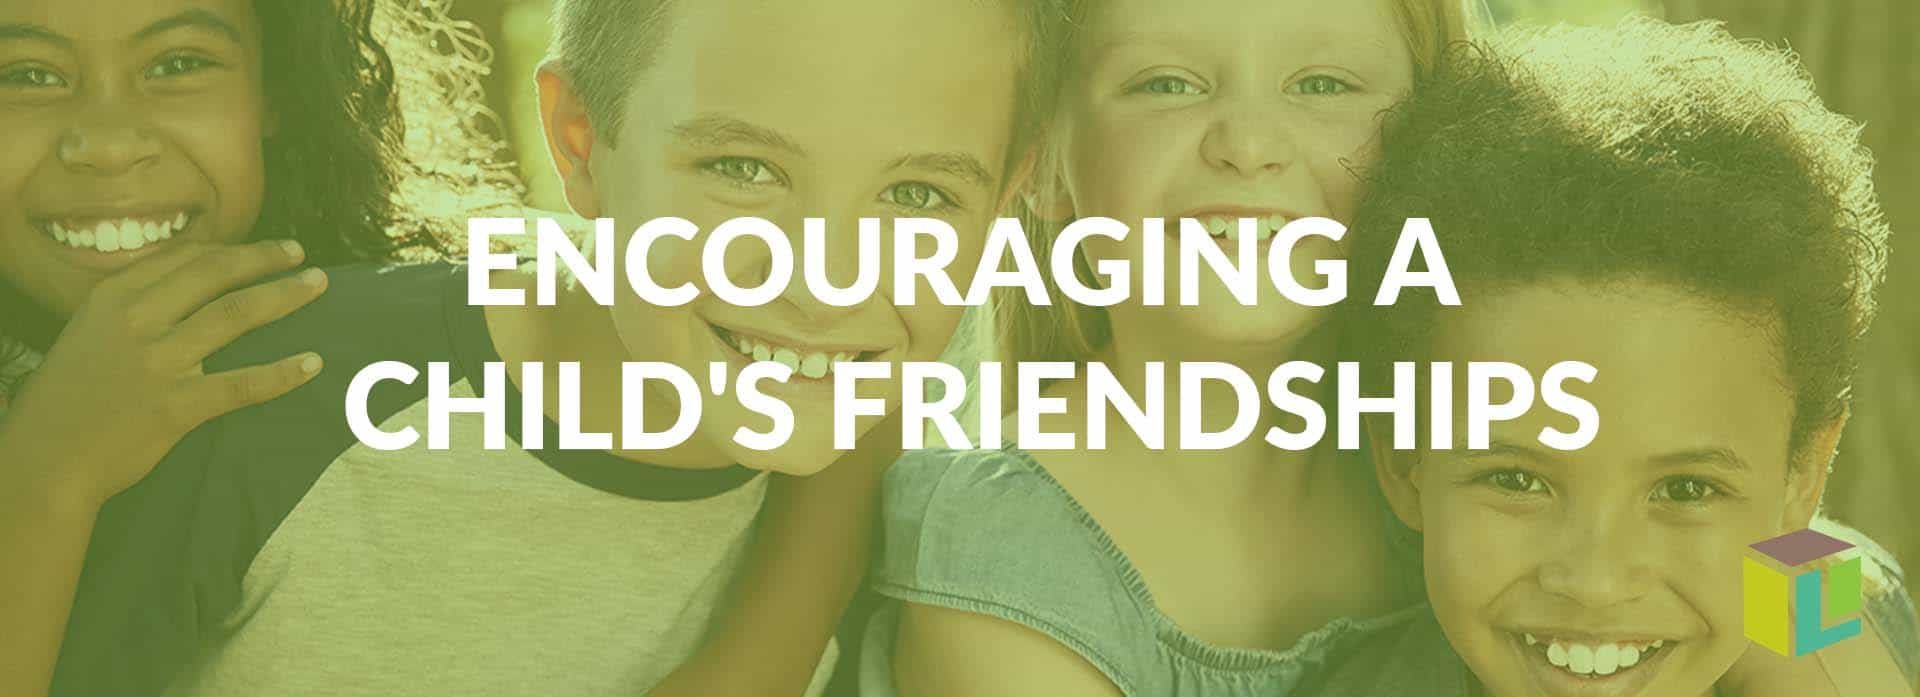 Encouraging A Child's Friendships Encouraging A Child's Friendships Encouraging A Child's Friendships Encouraging A Child's Friendships